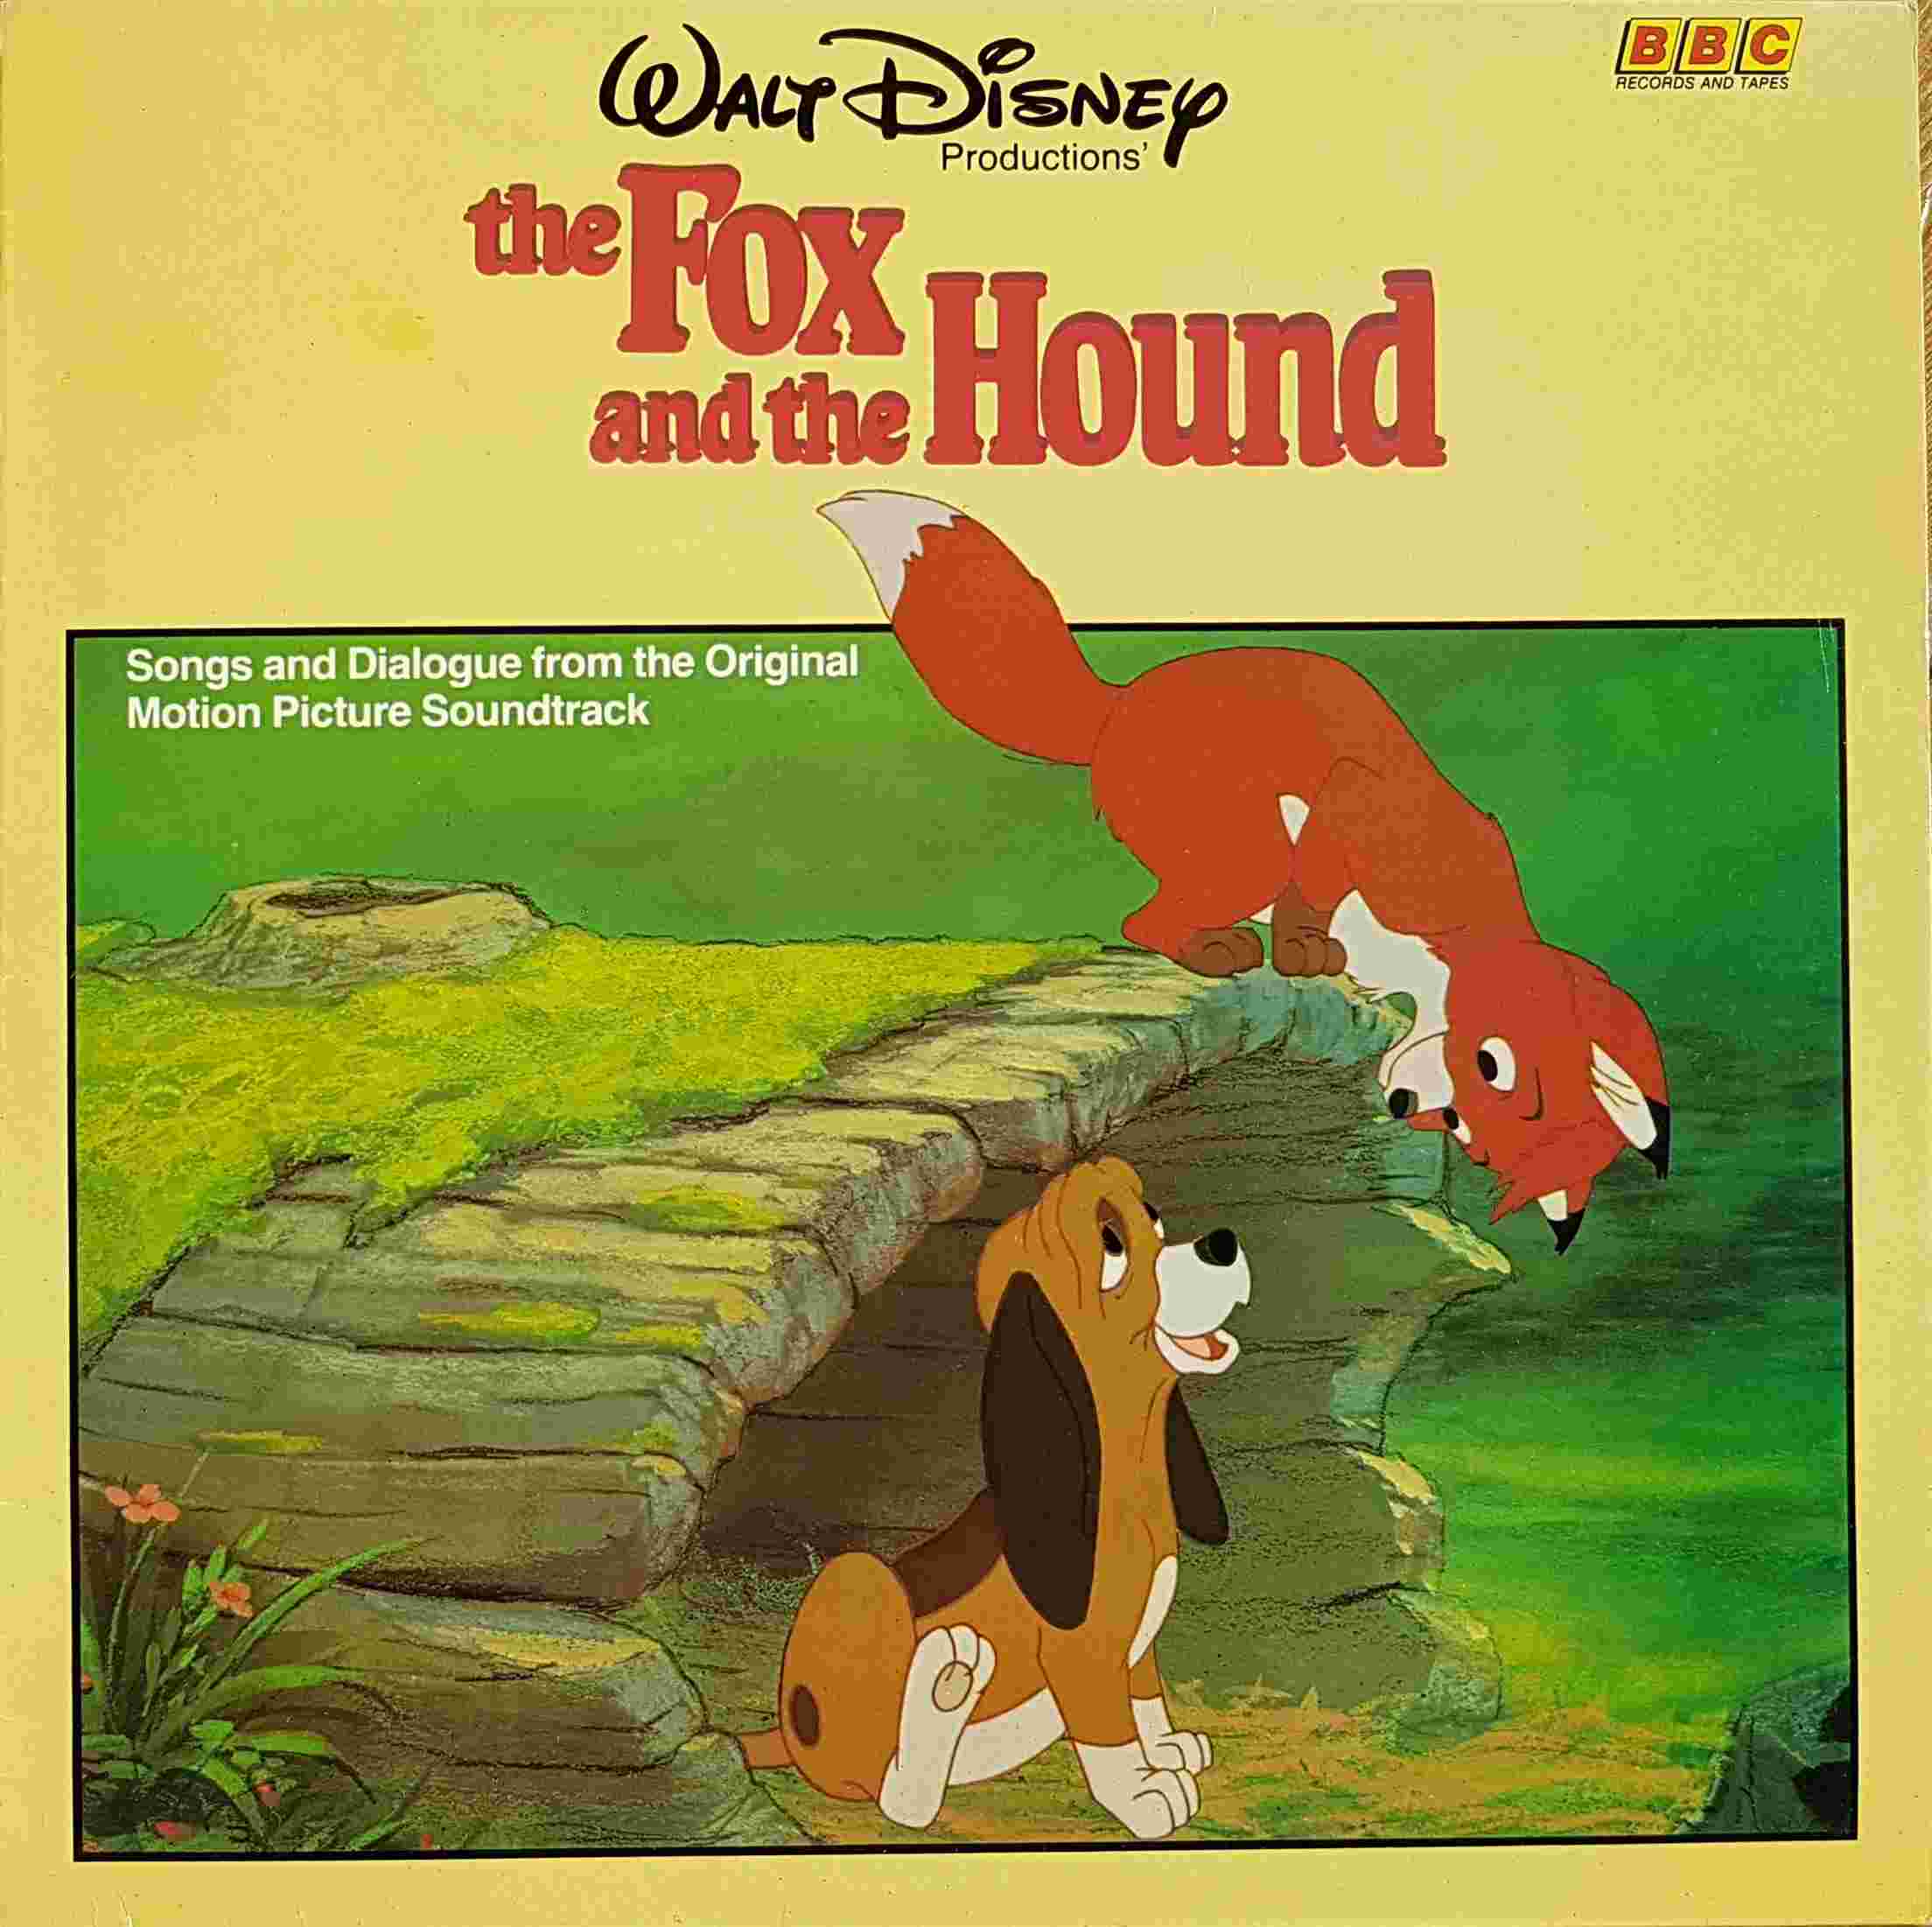 Picture of REC 576 The fox and the hound by artist Various from the BBC albums - Records and Tapes library